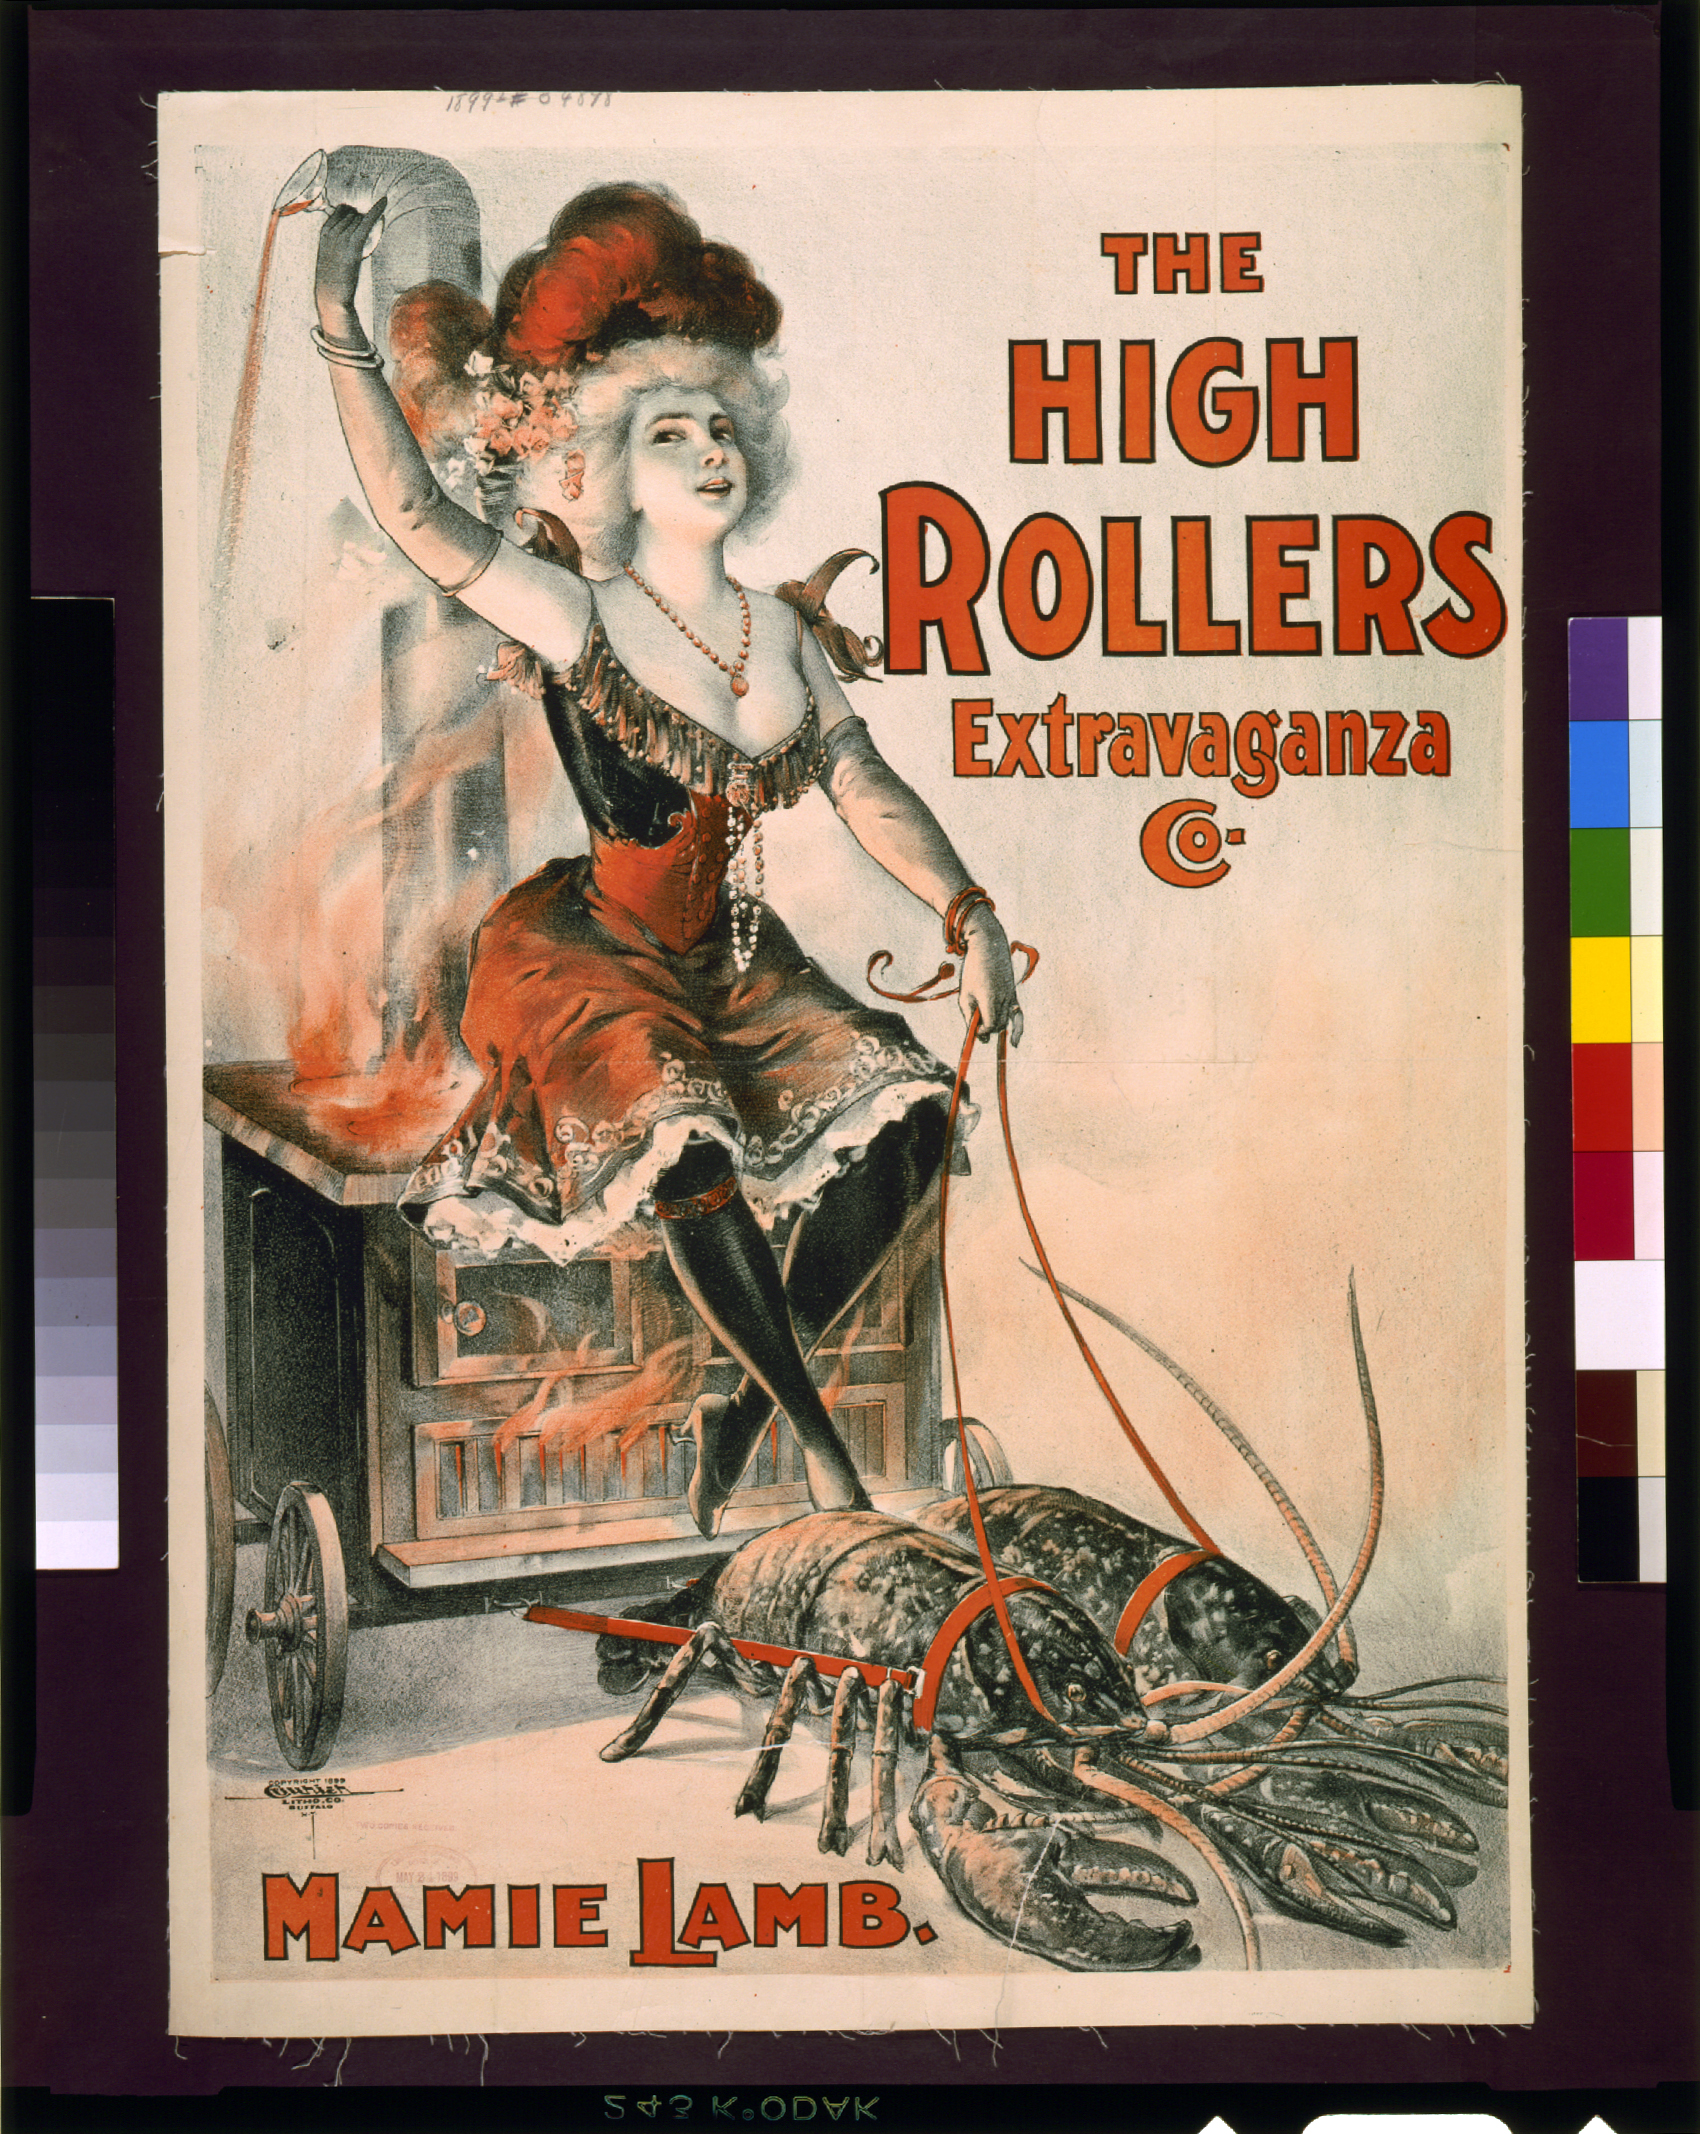 A promotional poster for the burlesque group named The High Rollers Extravaganza Company. Poster illustration depicts High Rollers member Mamie Lamb riding a burning, firey stove w/flames licking out from the interior that is being pulled by two giant lobsters. The poster was received by the US Copyright Office mailroom from the Courier Lithography company on May 24, 1899.